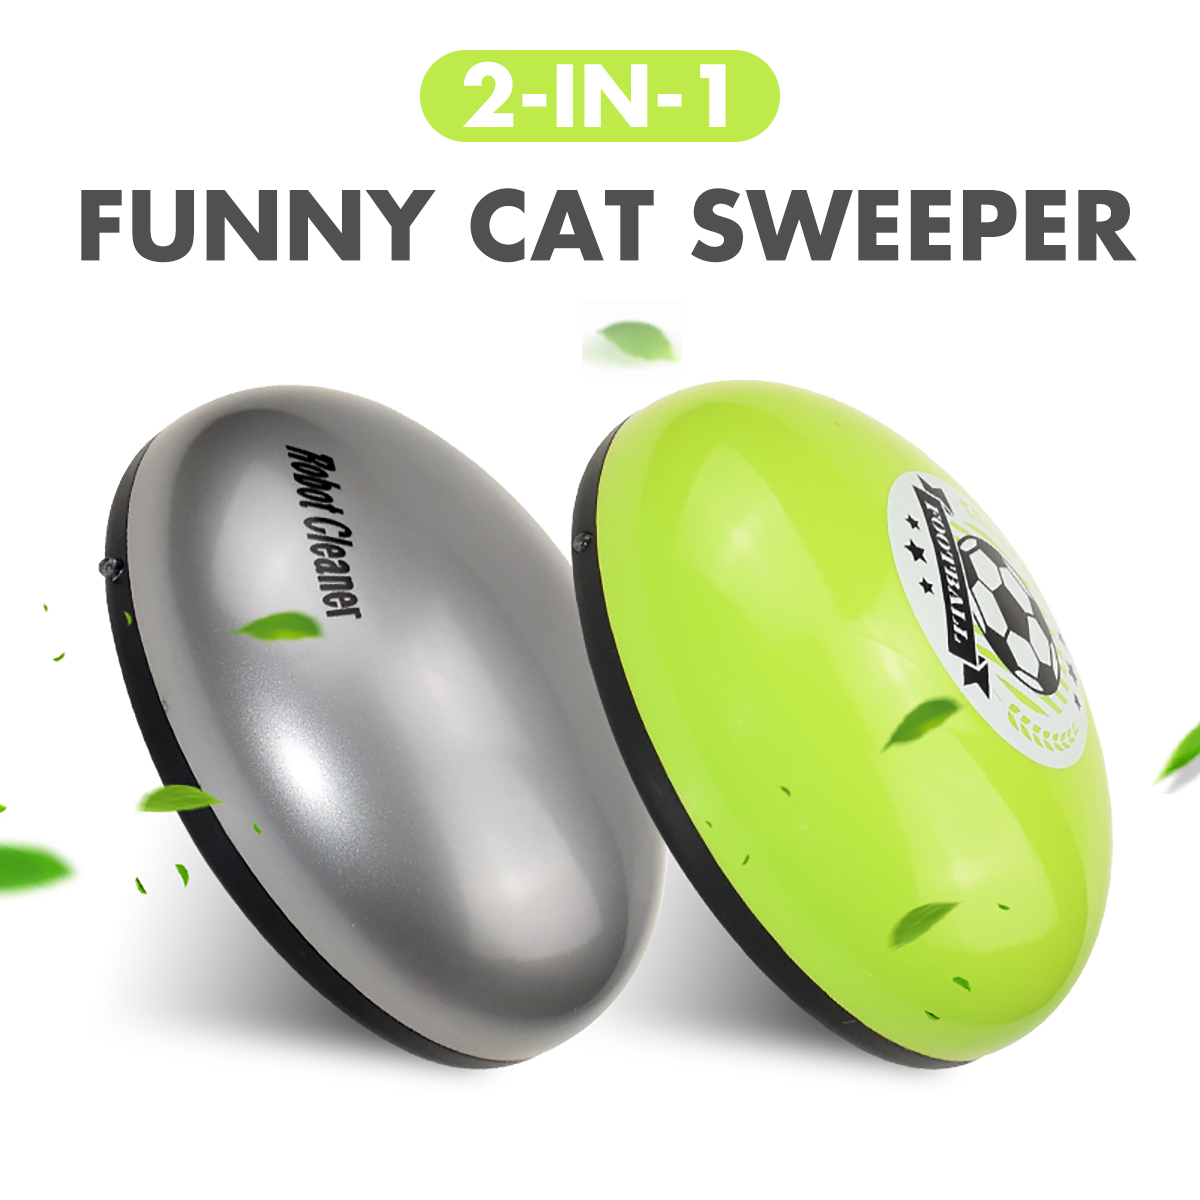 2 in 1 Smart Funny Cat Sweeper Robot Cleaner Machine Edge Auto Suction Home